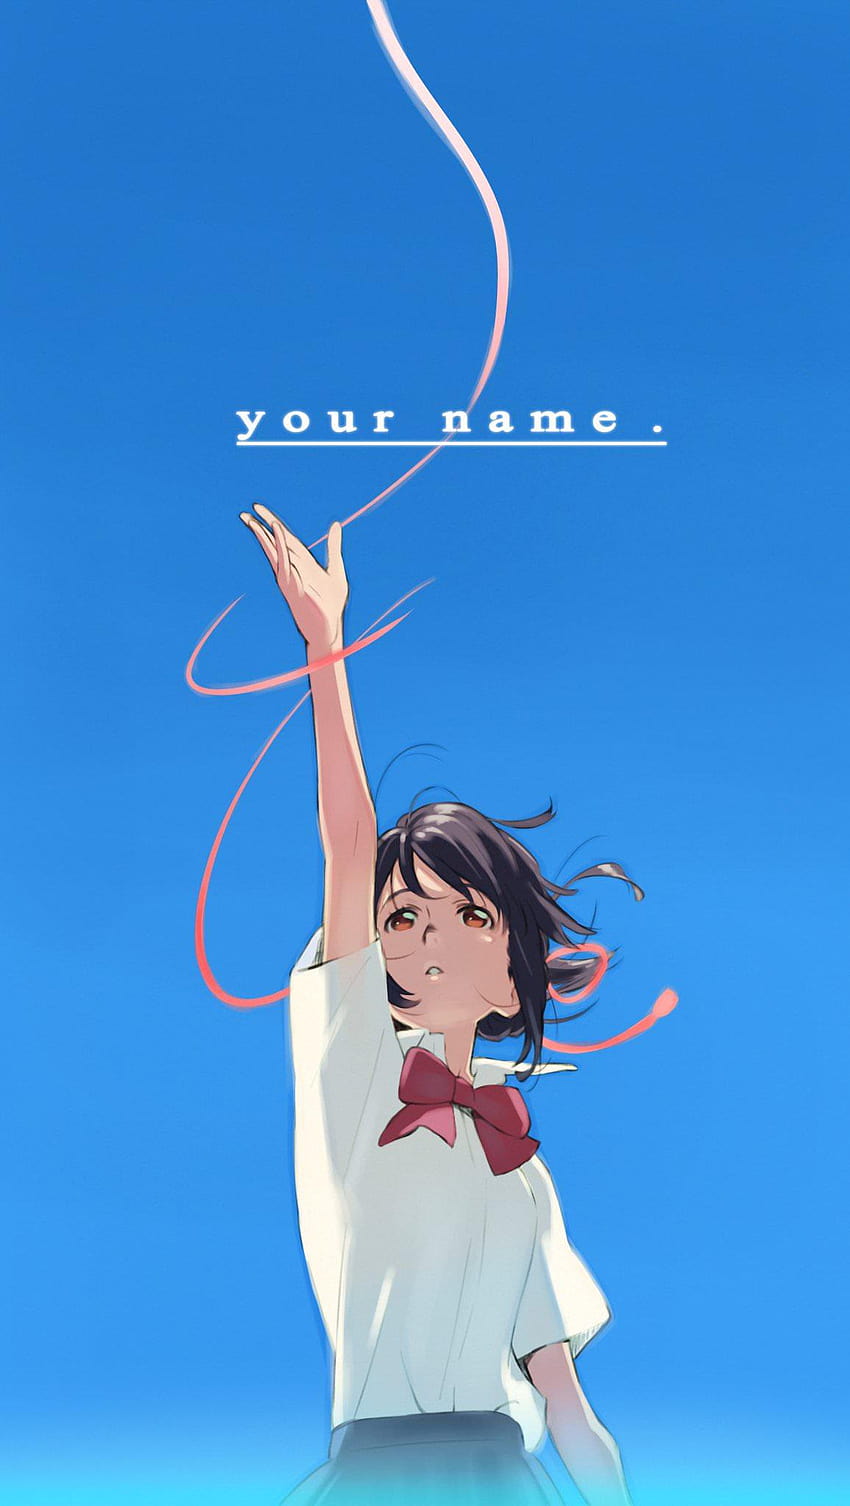 Makoto Shinkai has once used this KNNW/YN for his iPhone, weathering with you HD phone wallpaper